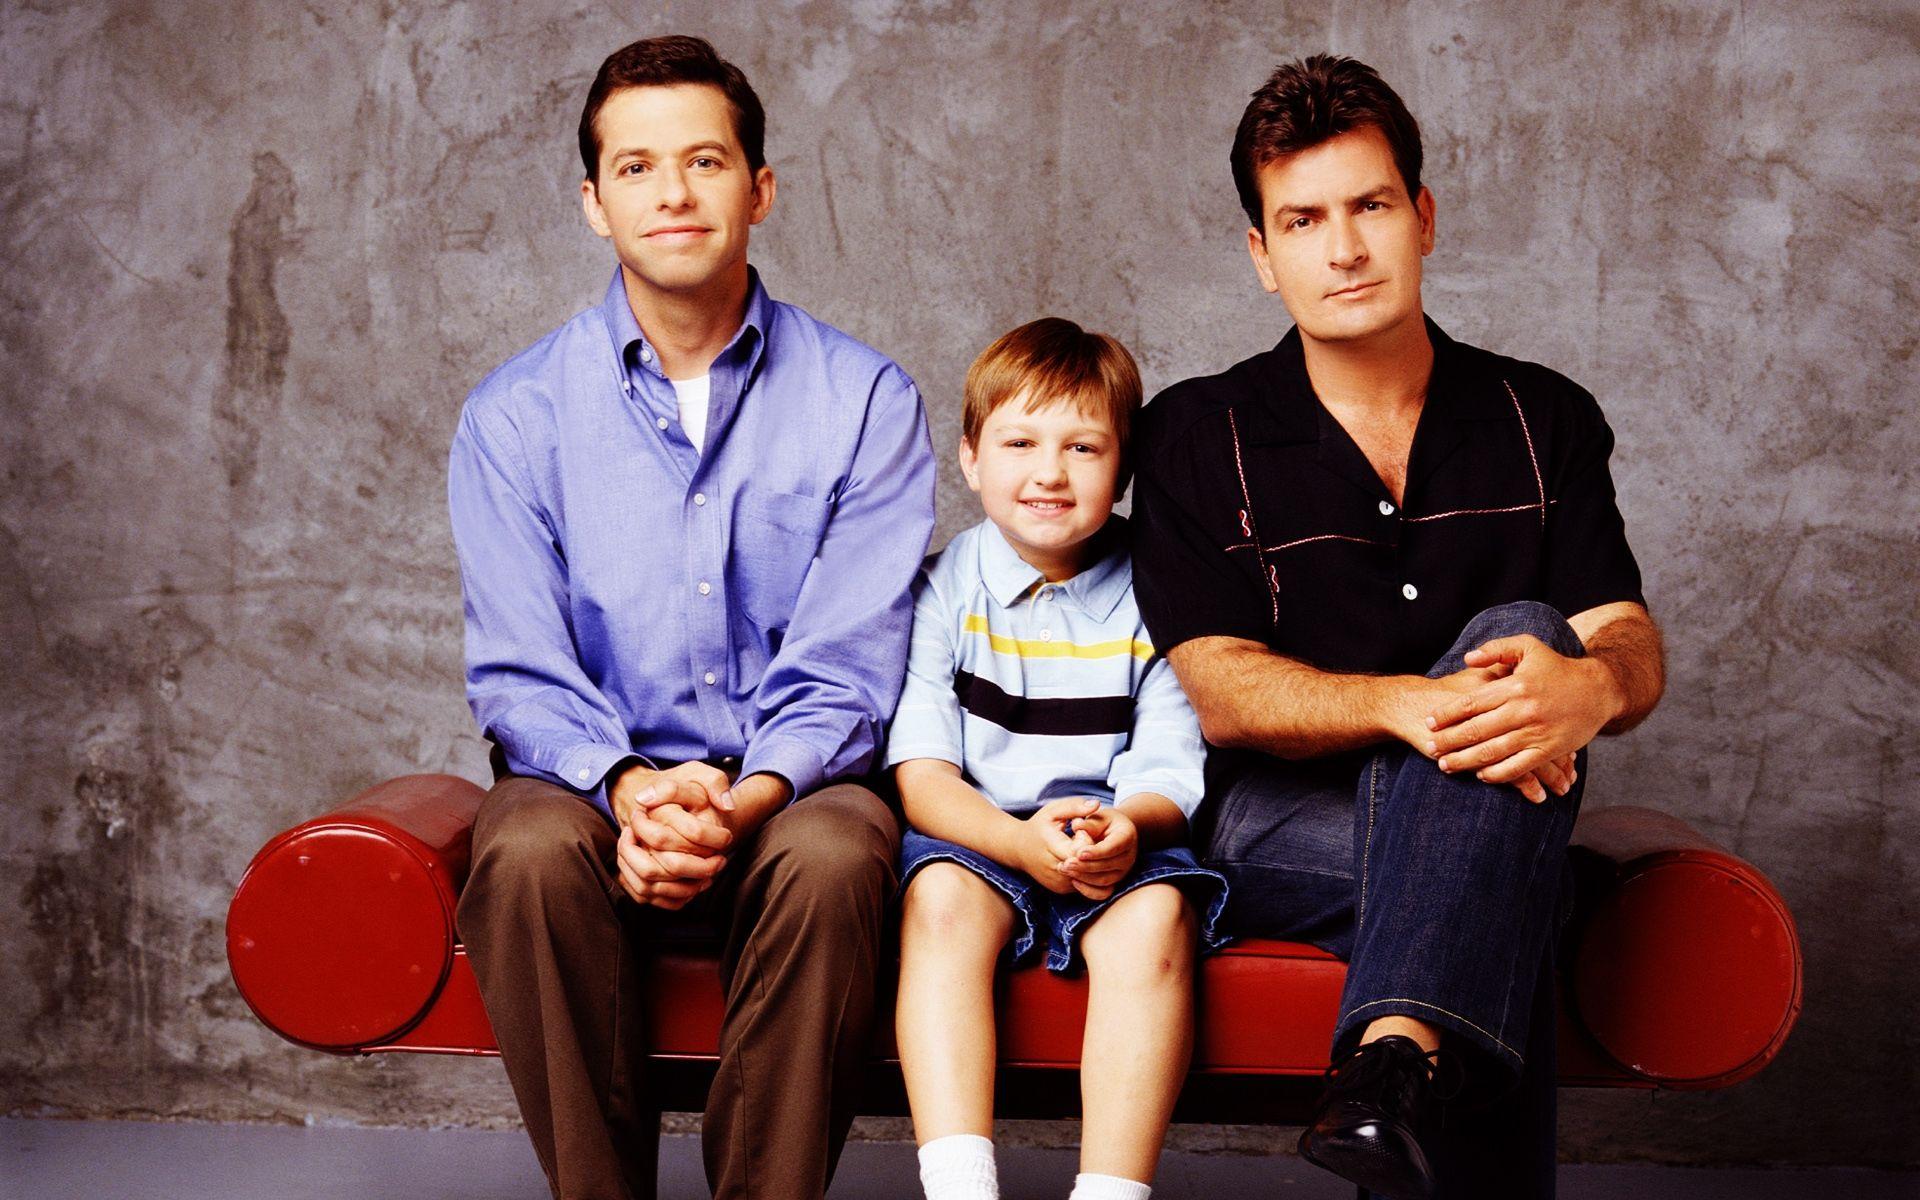 Two and a Half Men Starring Charlie Sheen, Jon Cryer, and Angus T